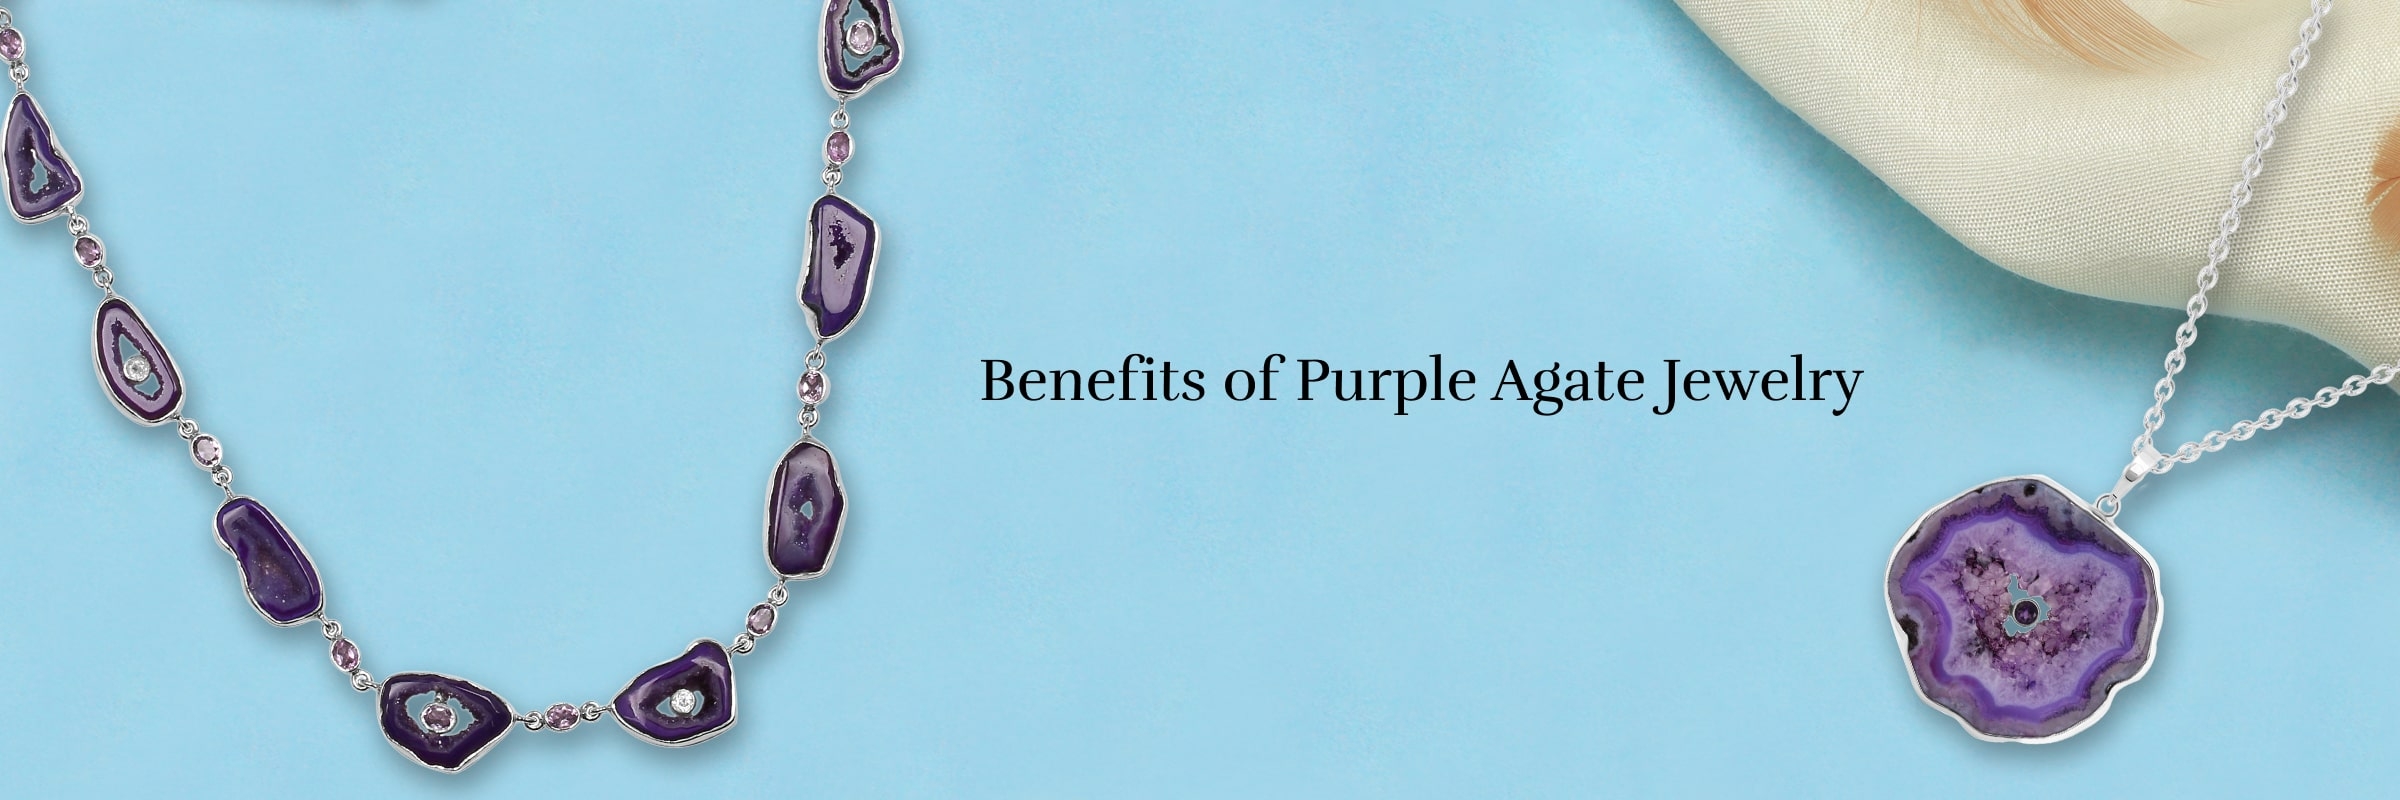 Advantages of Wearing Purple Agate Jewelry